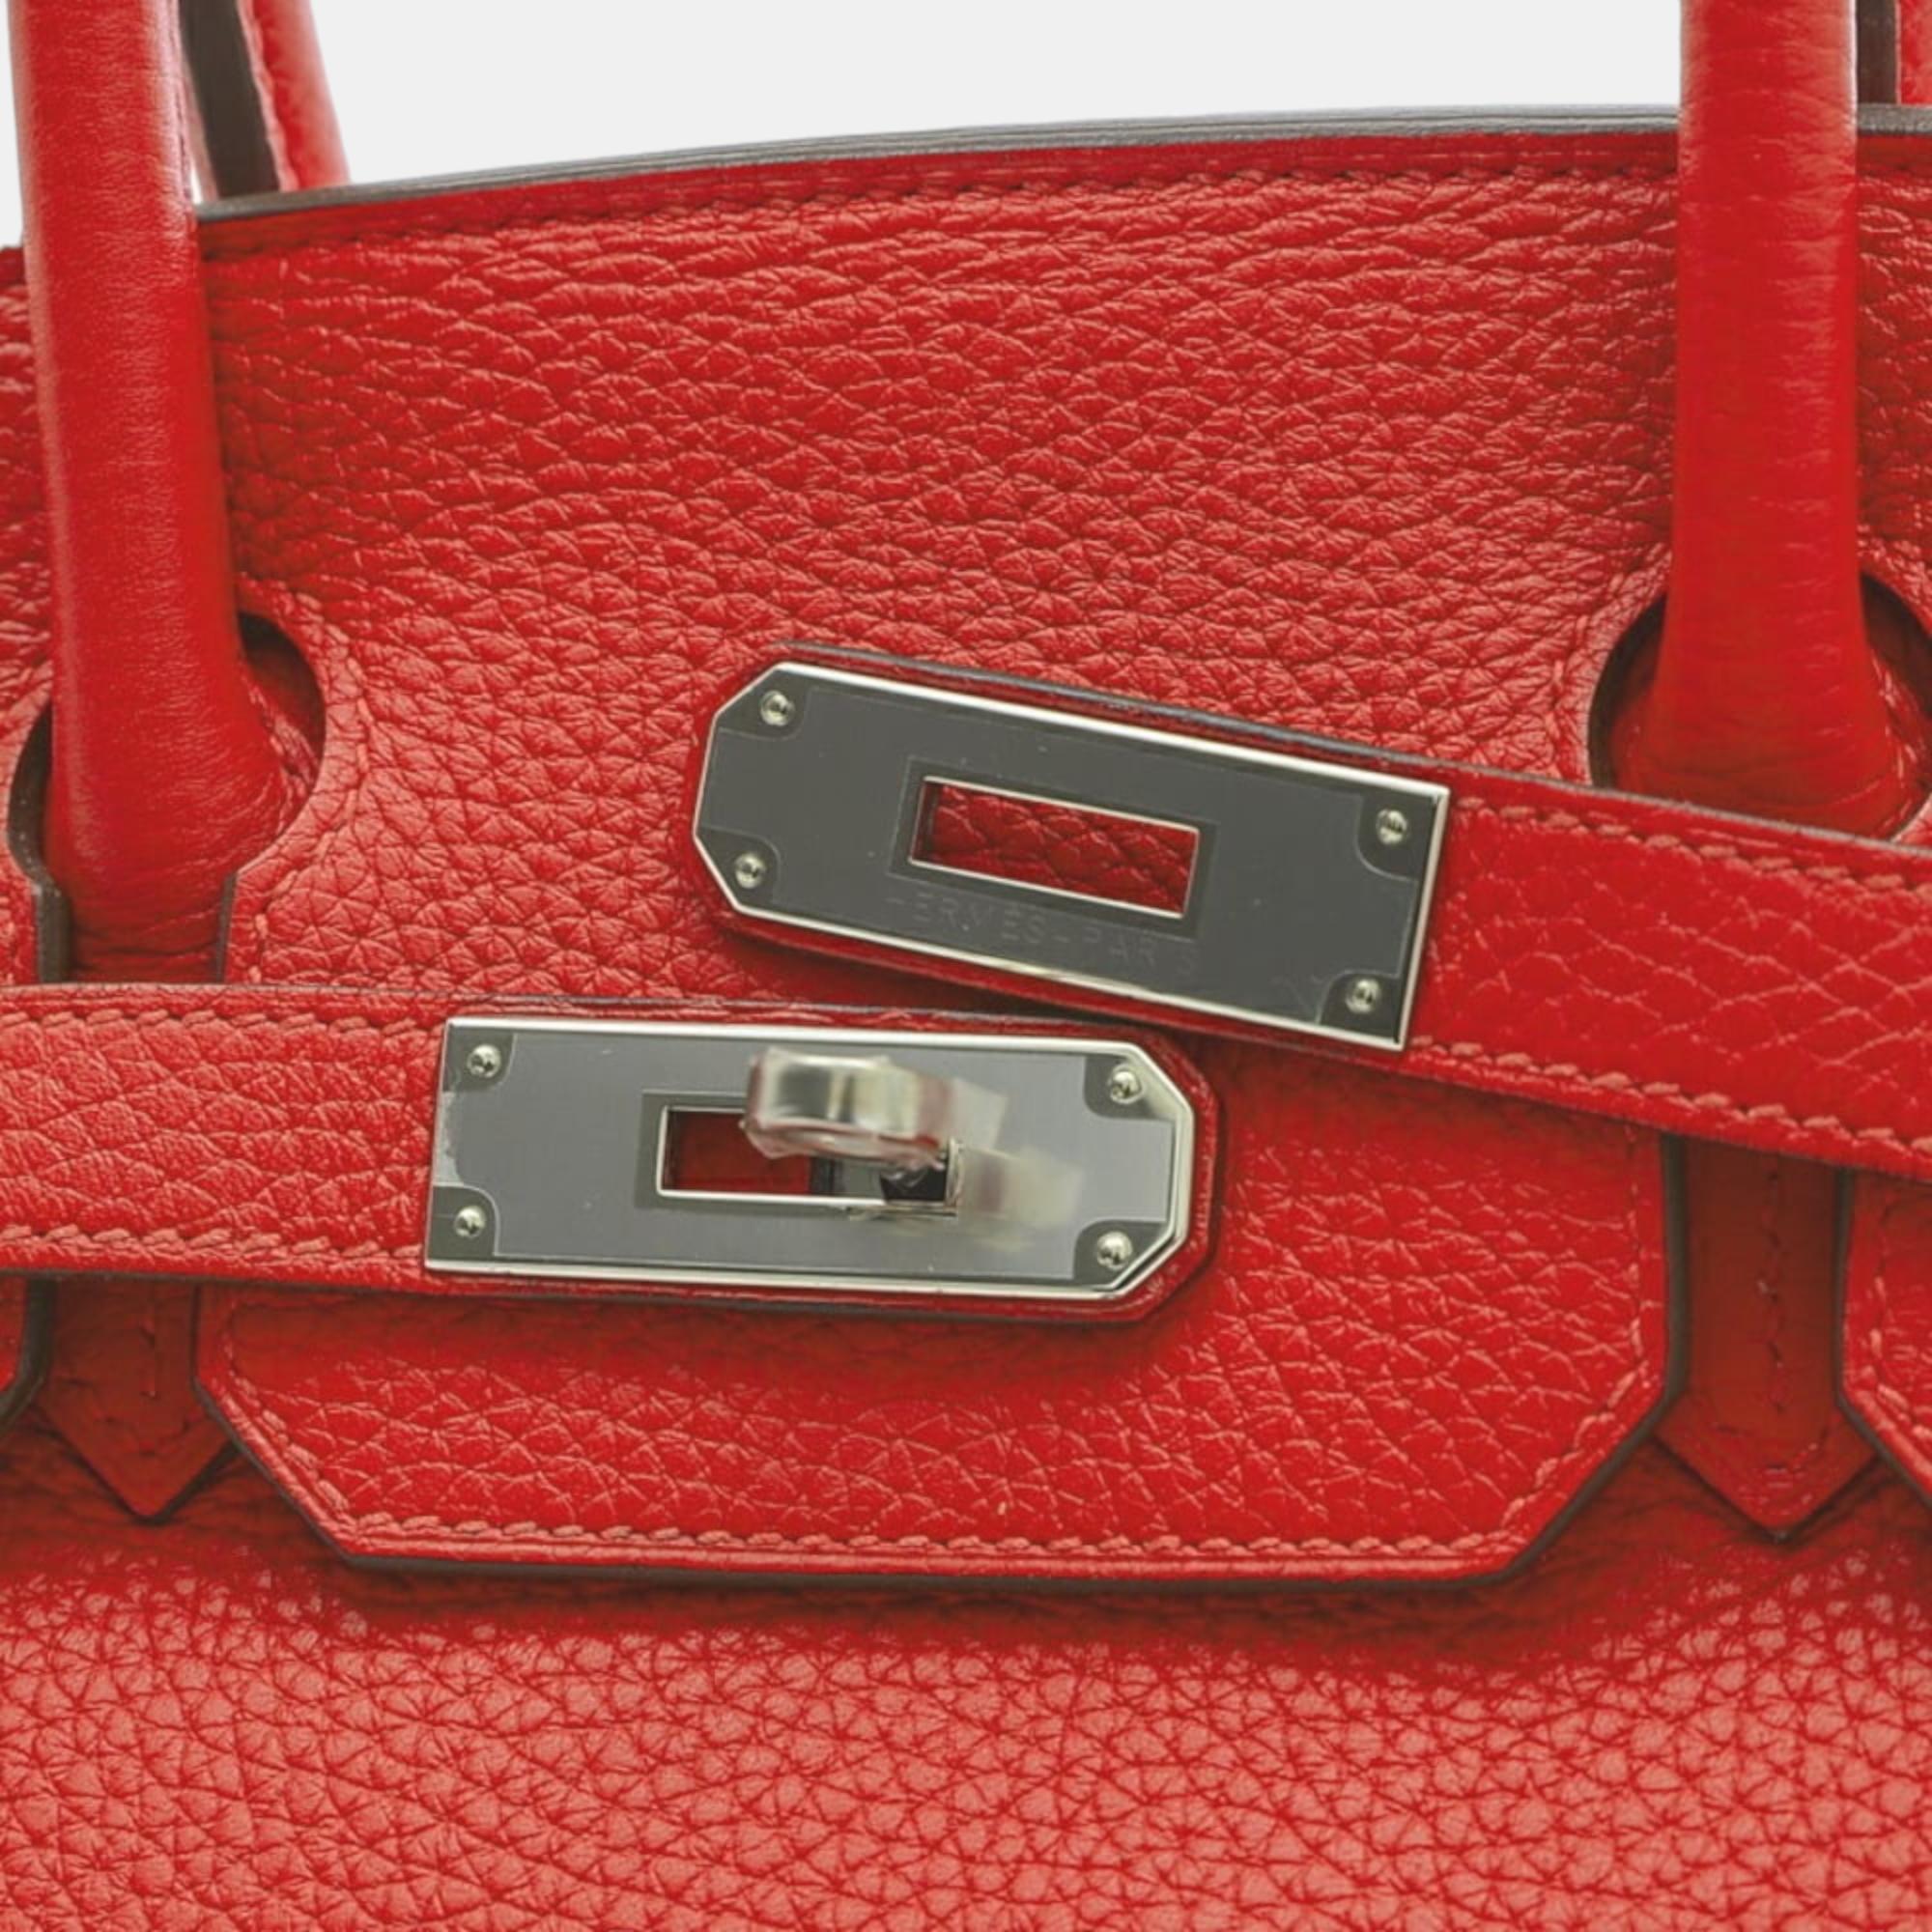 Hermes Birkin 30 Taurillon Clemence Rouge Cazac Silver Hardware X Engraved